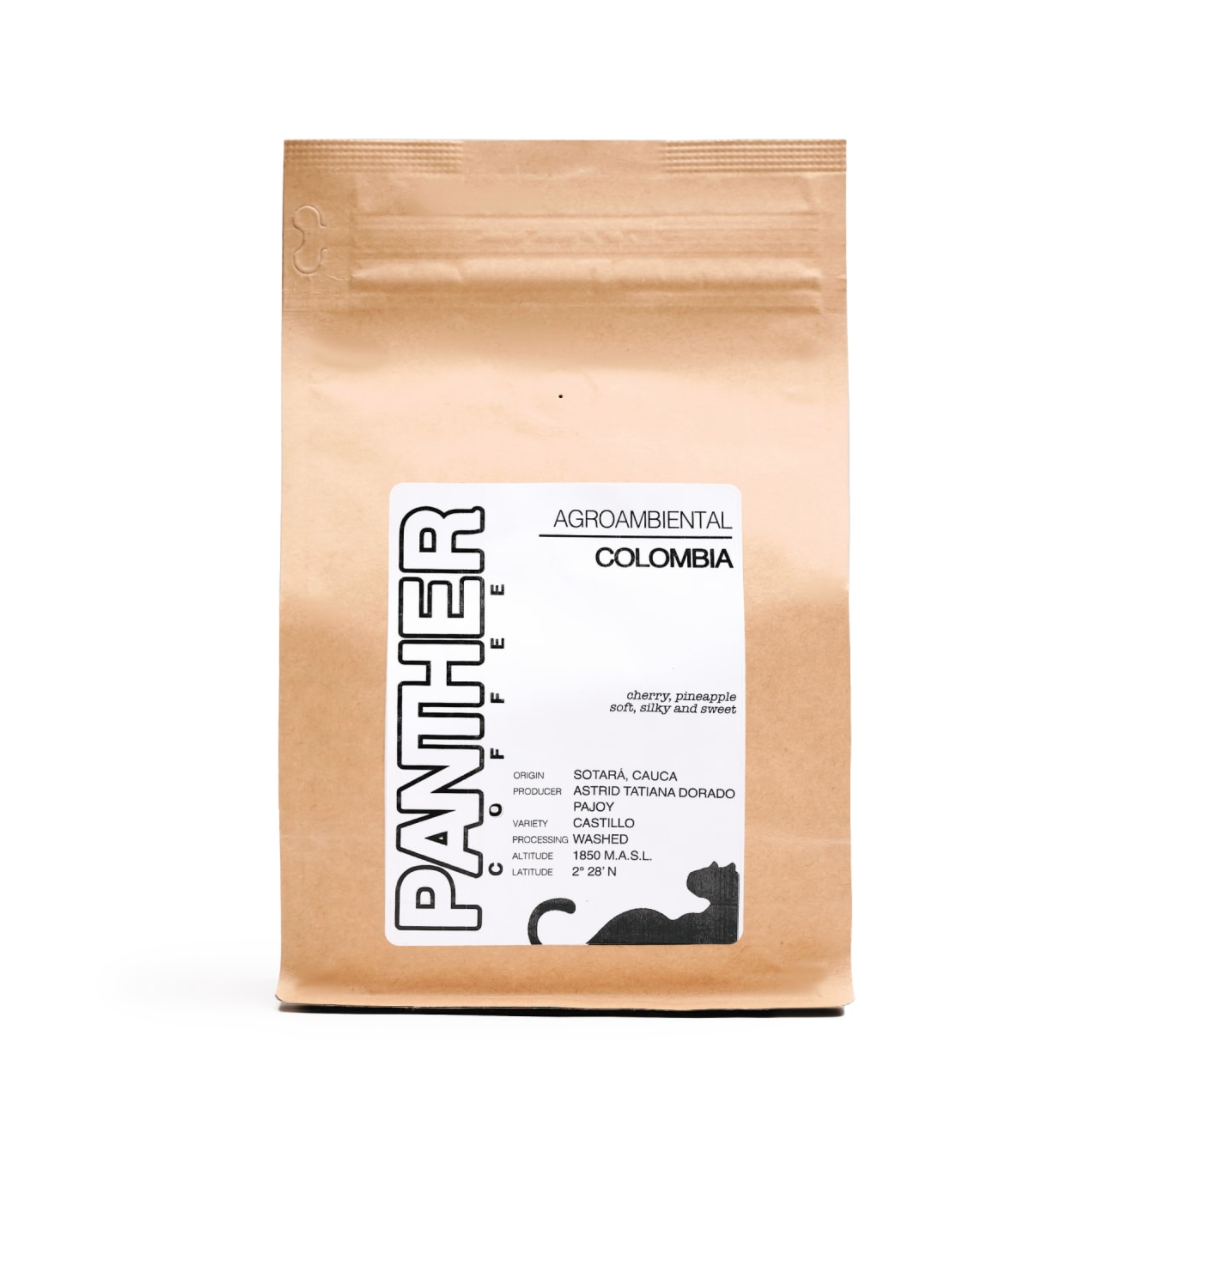 panther coffee Agroambiental new